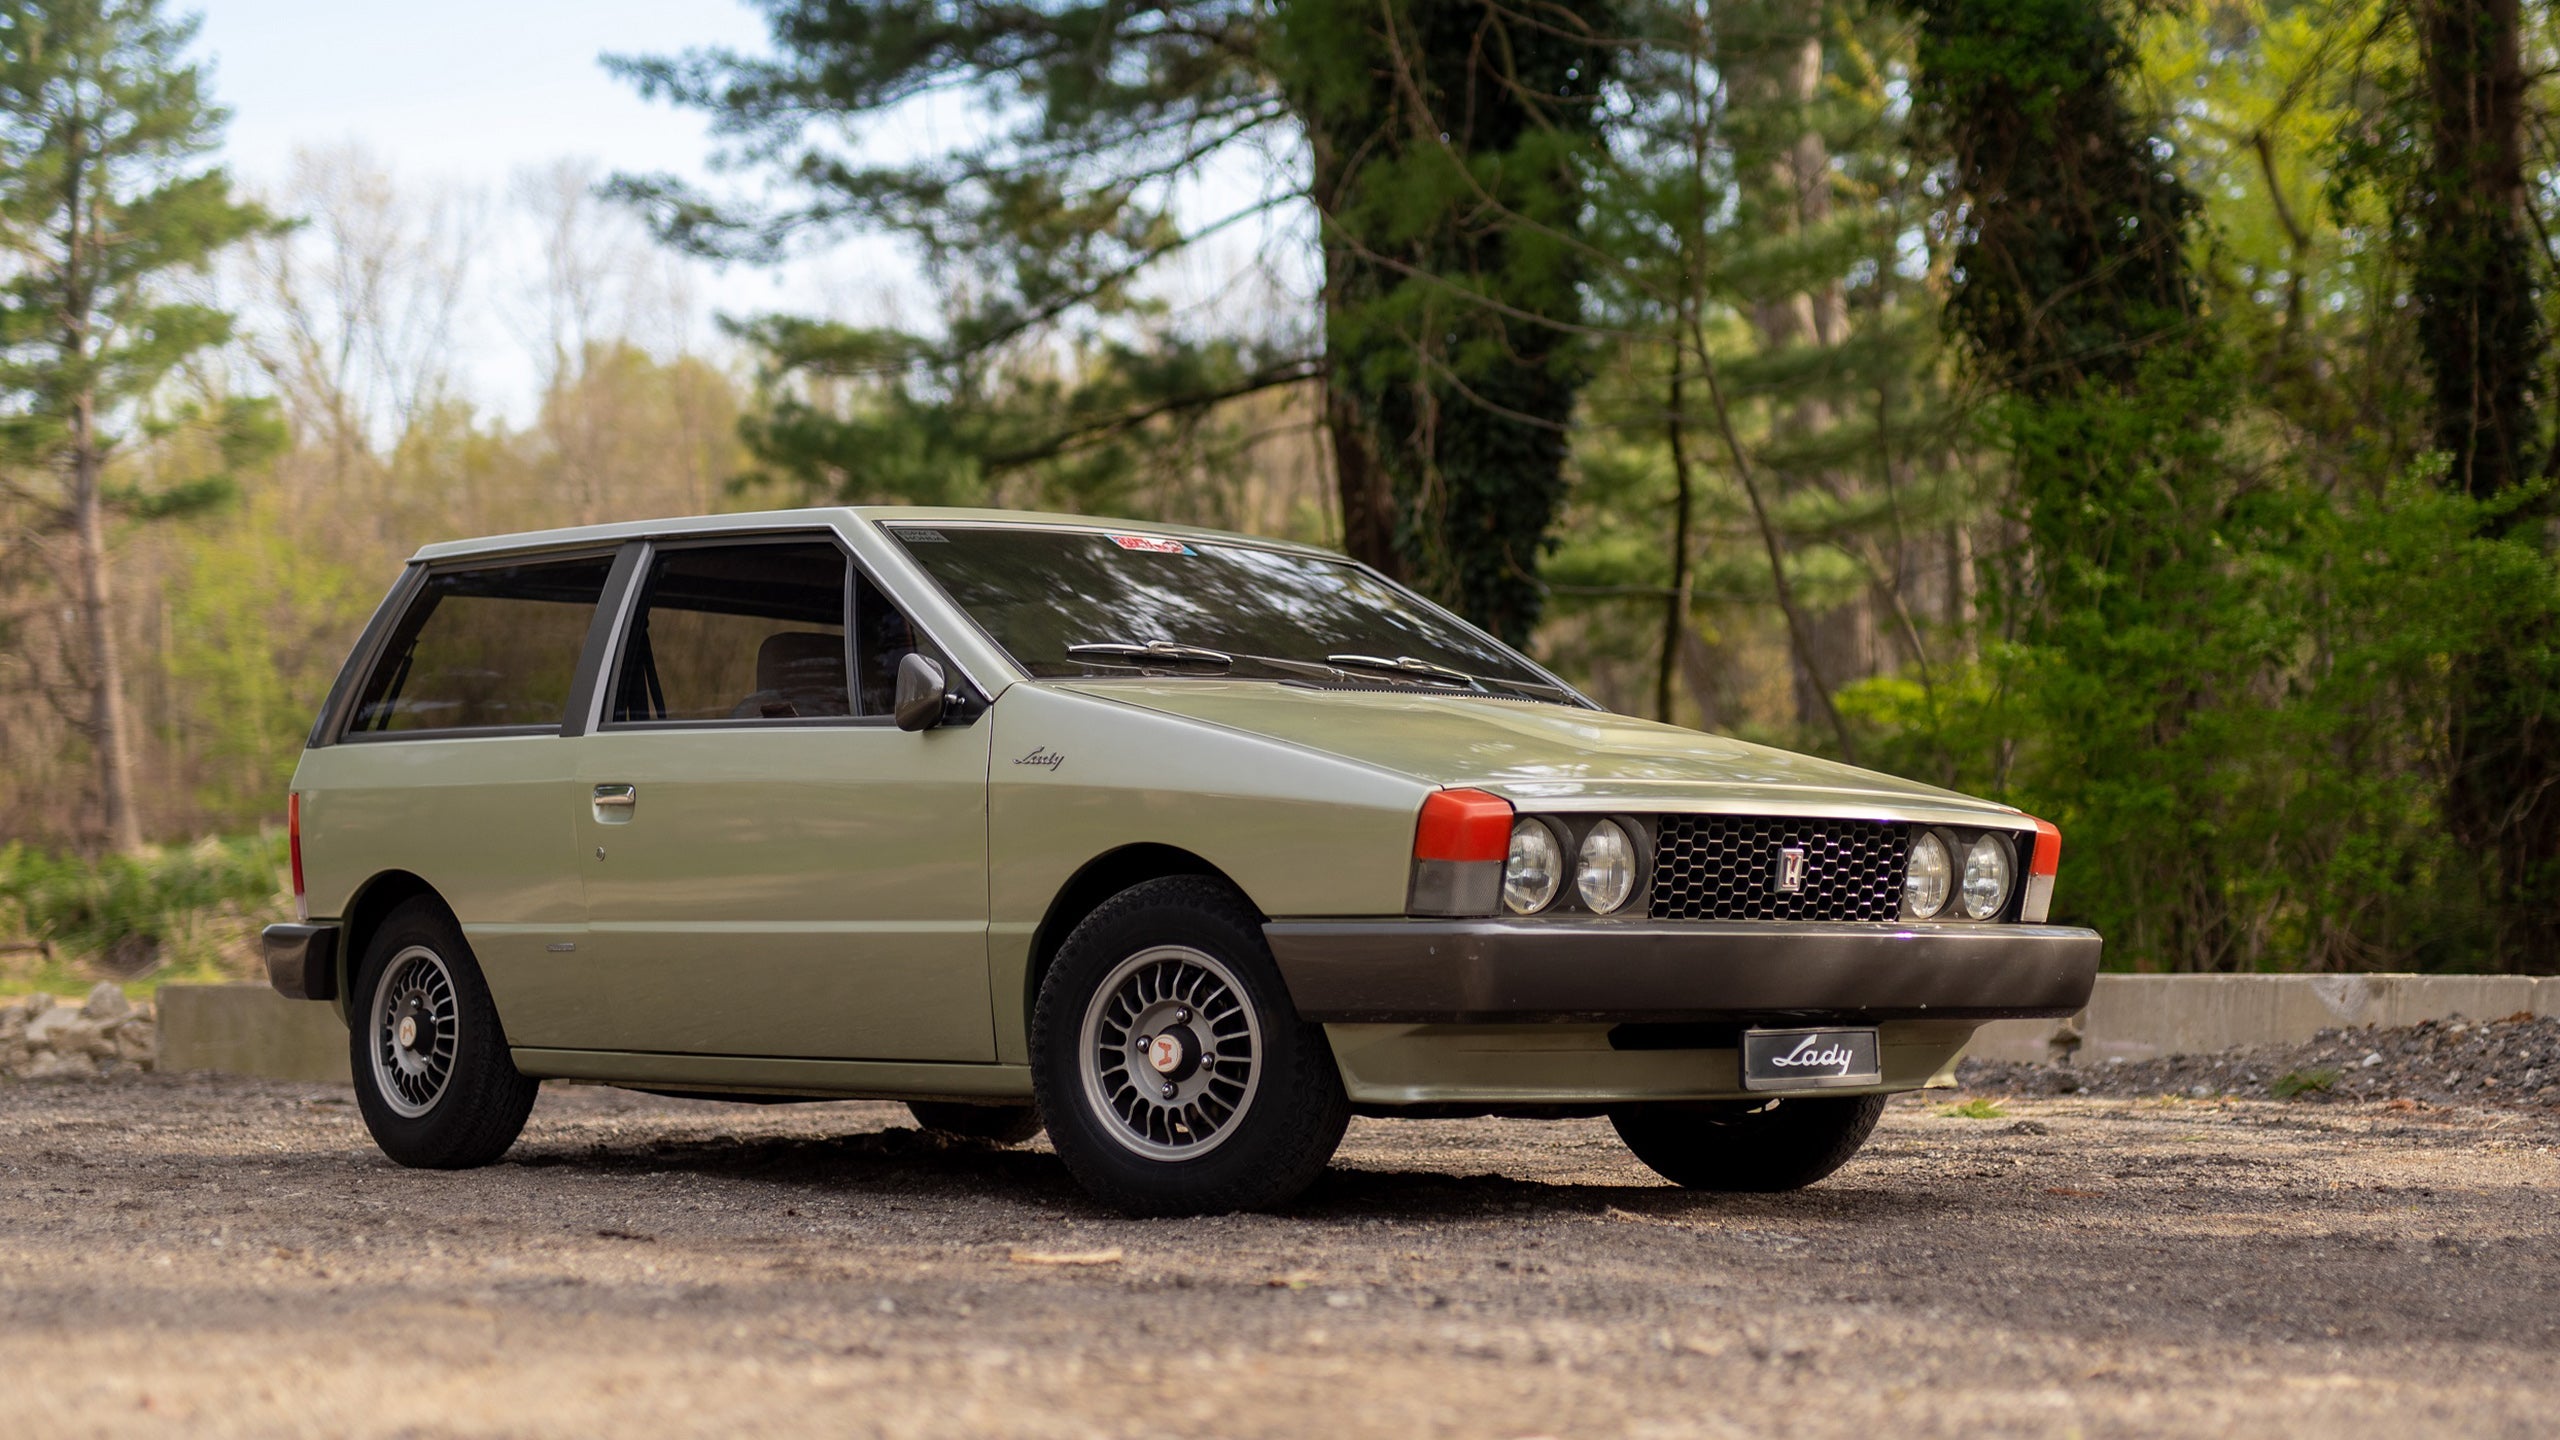 1976 Honda Lady Review: Driving the One-of-One Civic Wearing Haute Italian Fashion